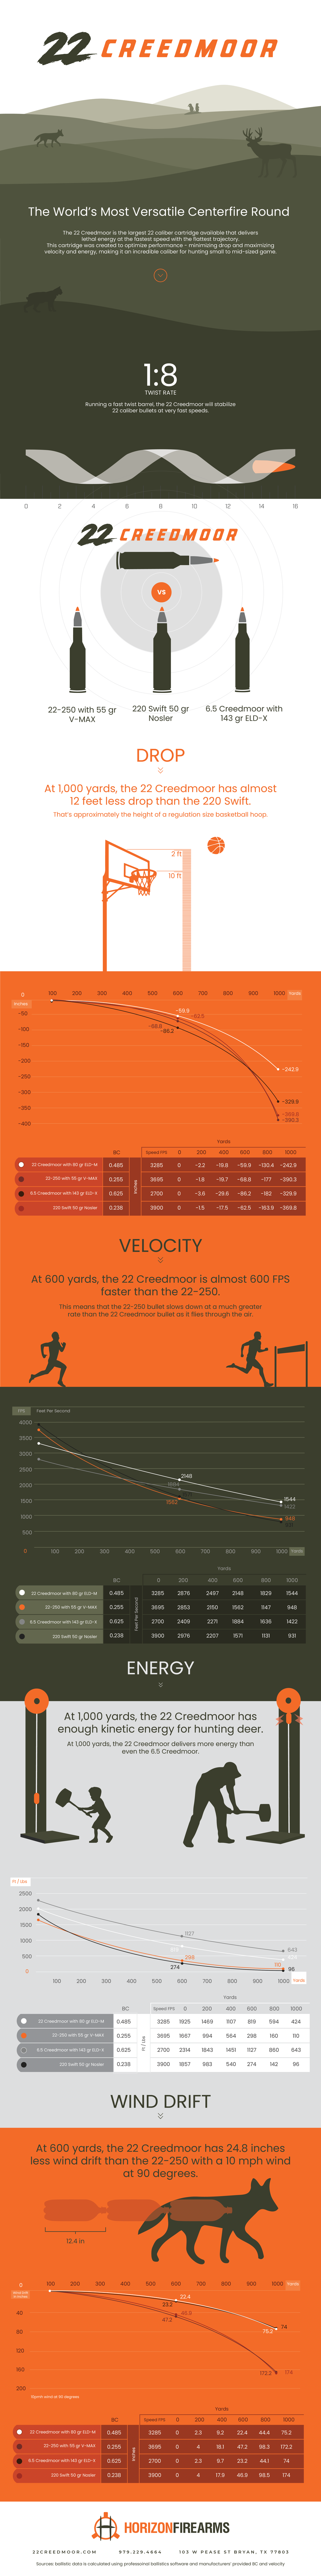 22 Creedmoor infographic and stats